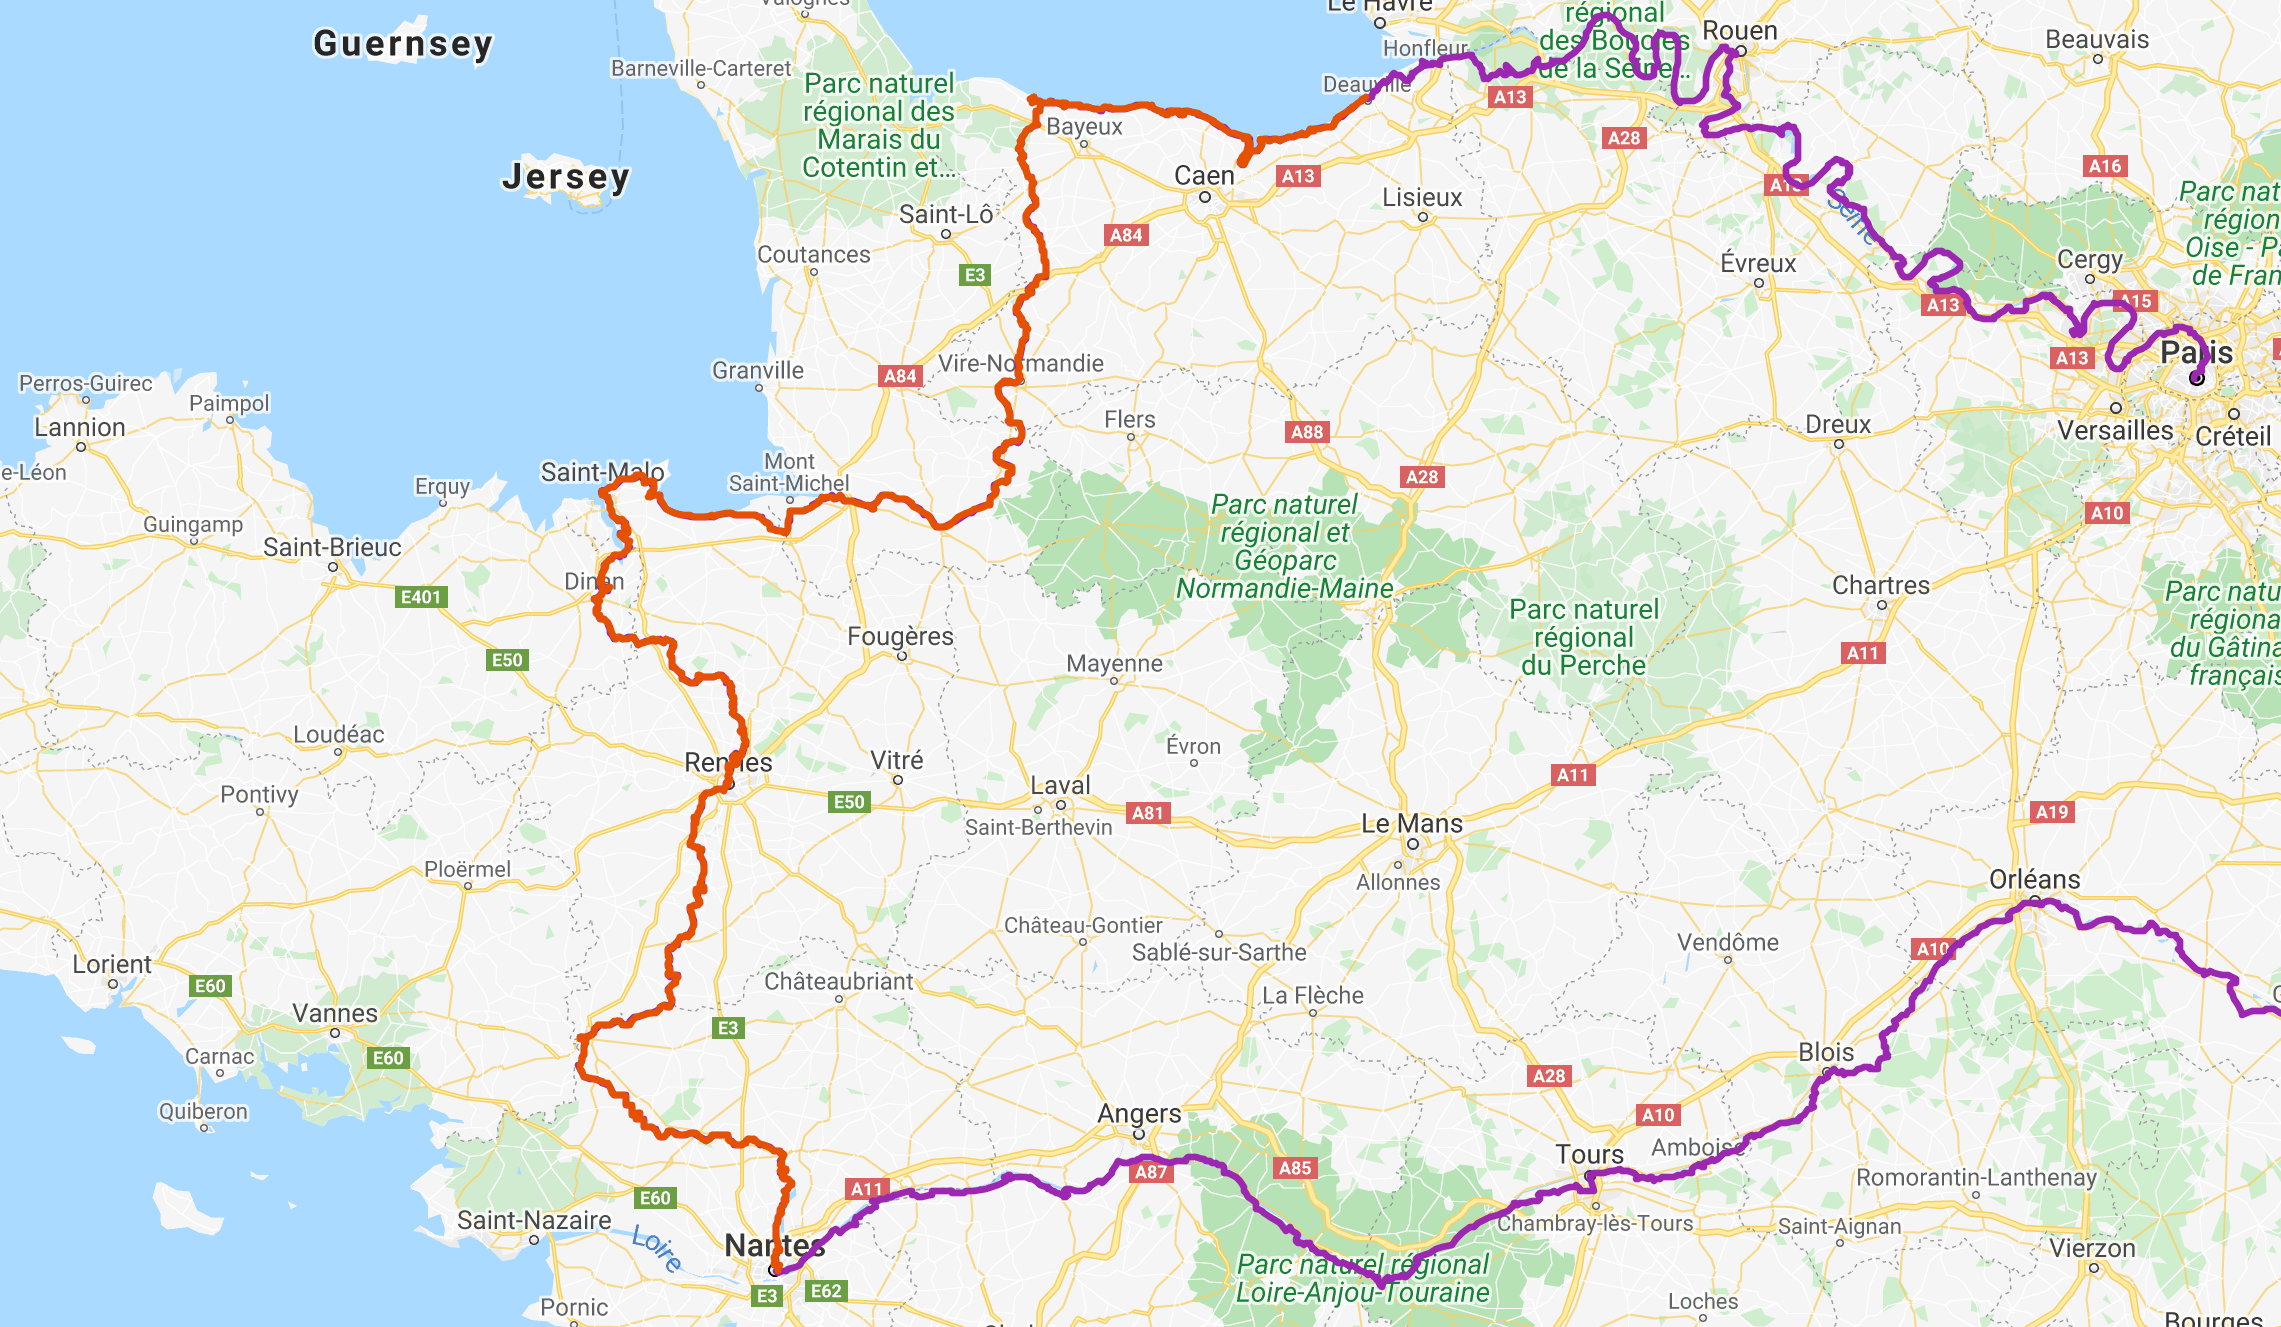 bicycle tour map normandy and brittany france